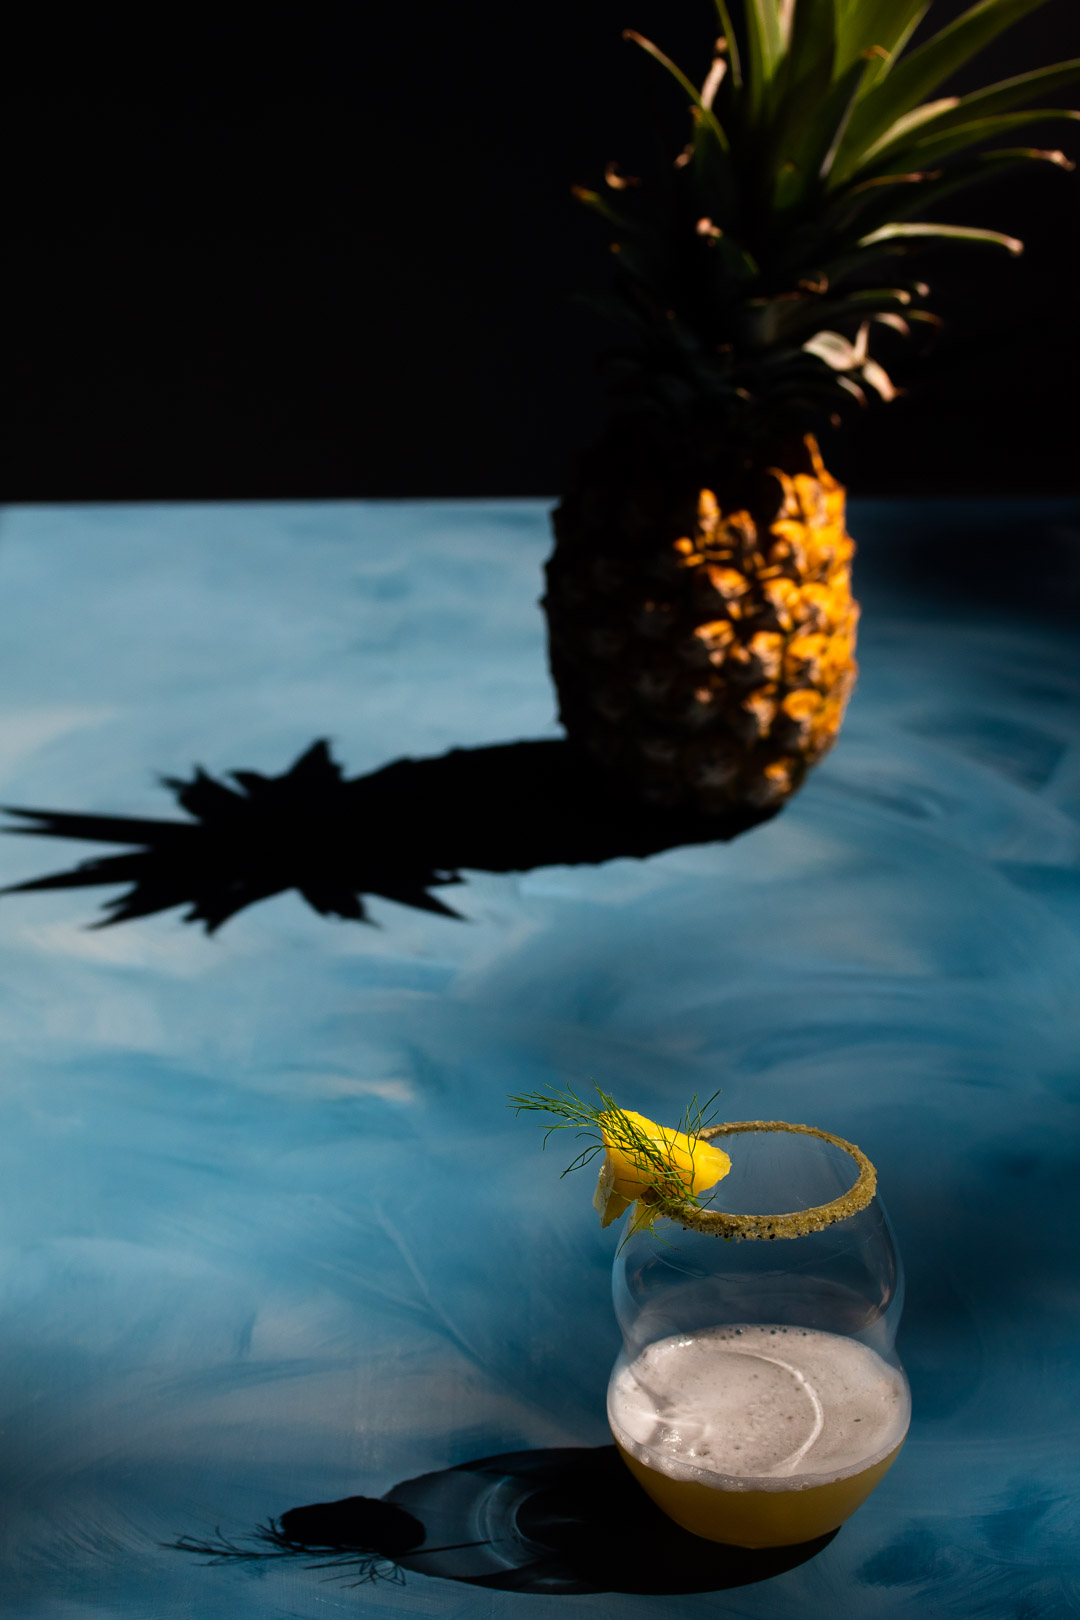 pineapple fennel shrub margarita cocktail with pineapple and shadow